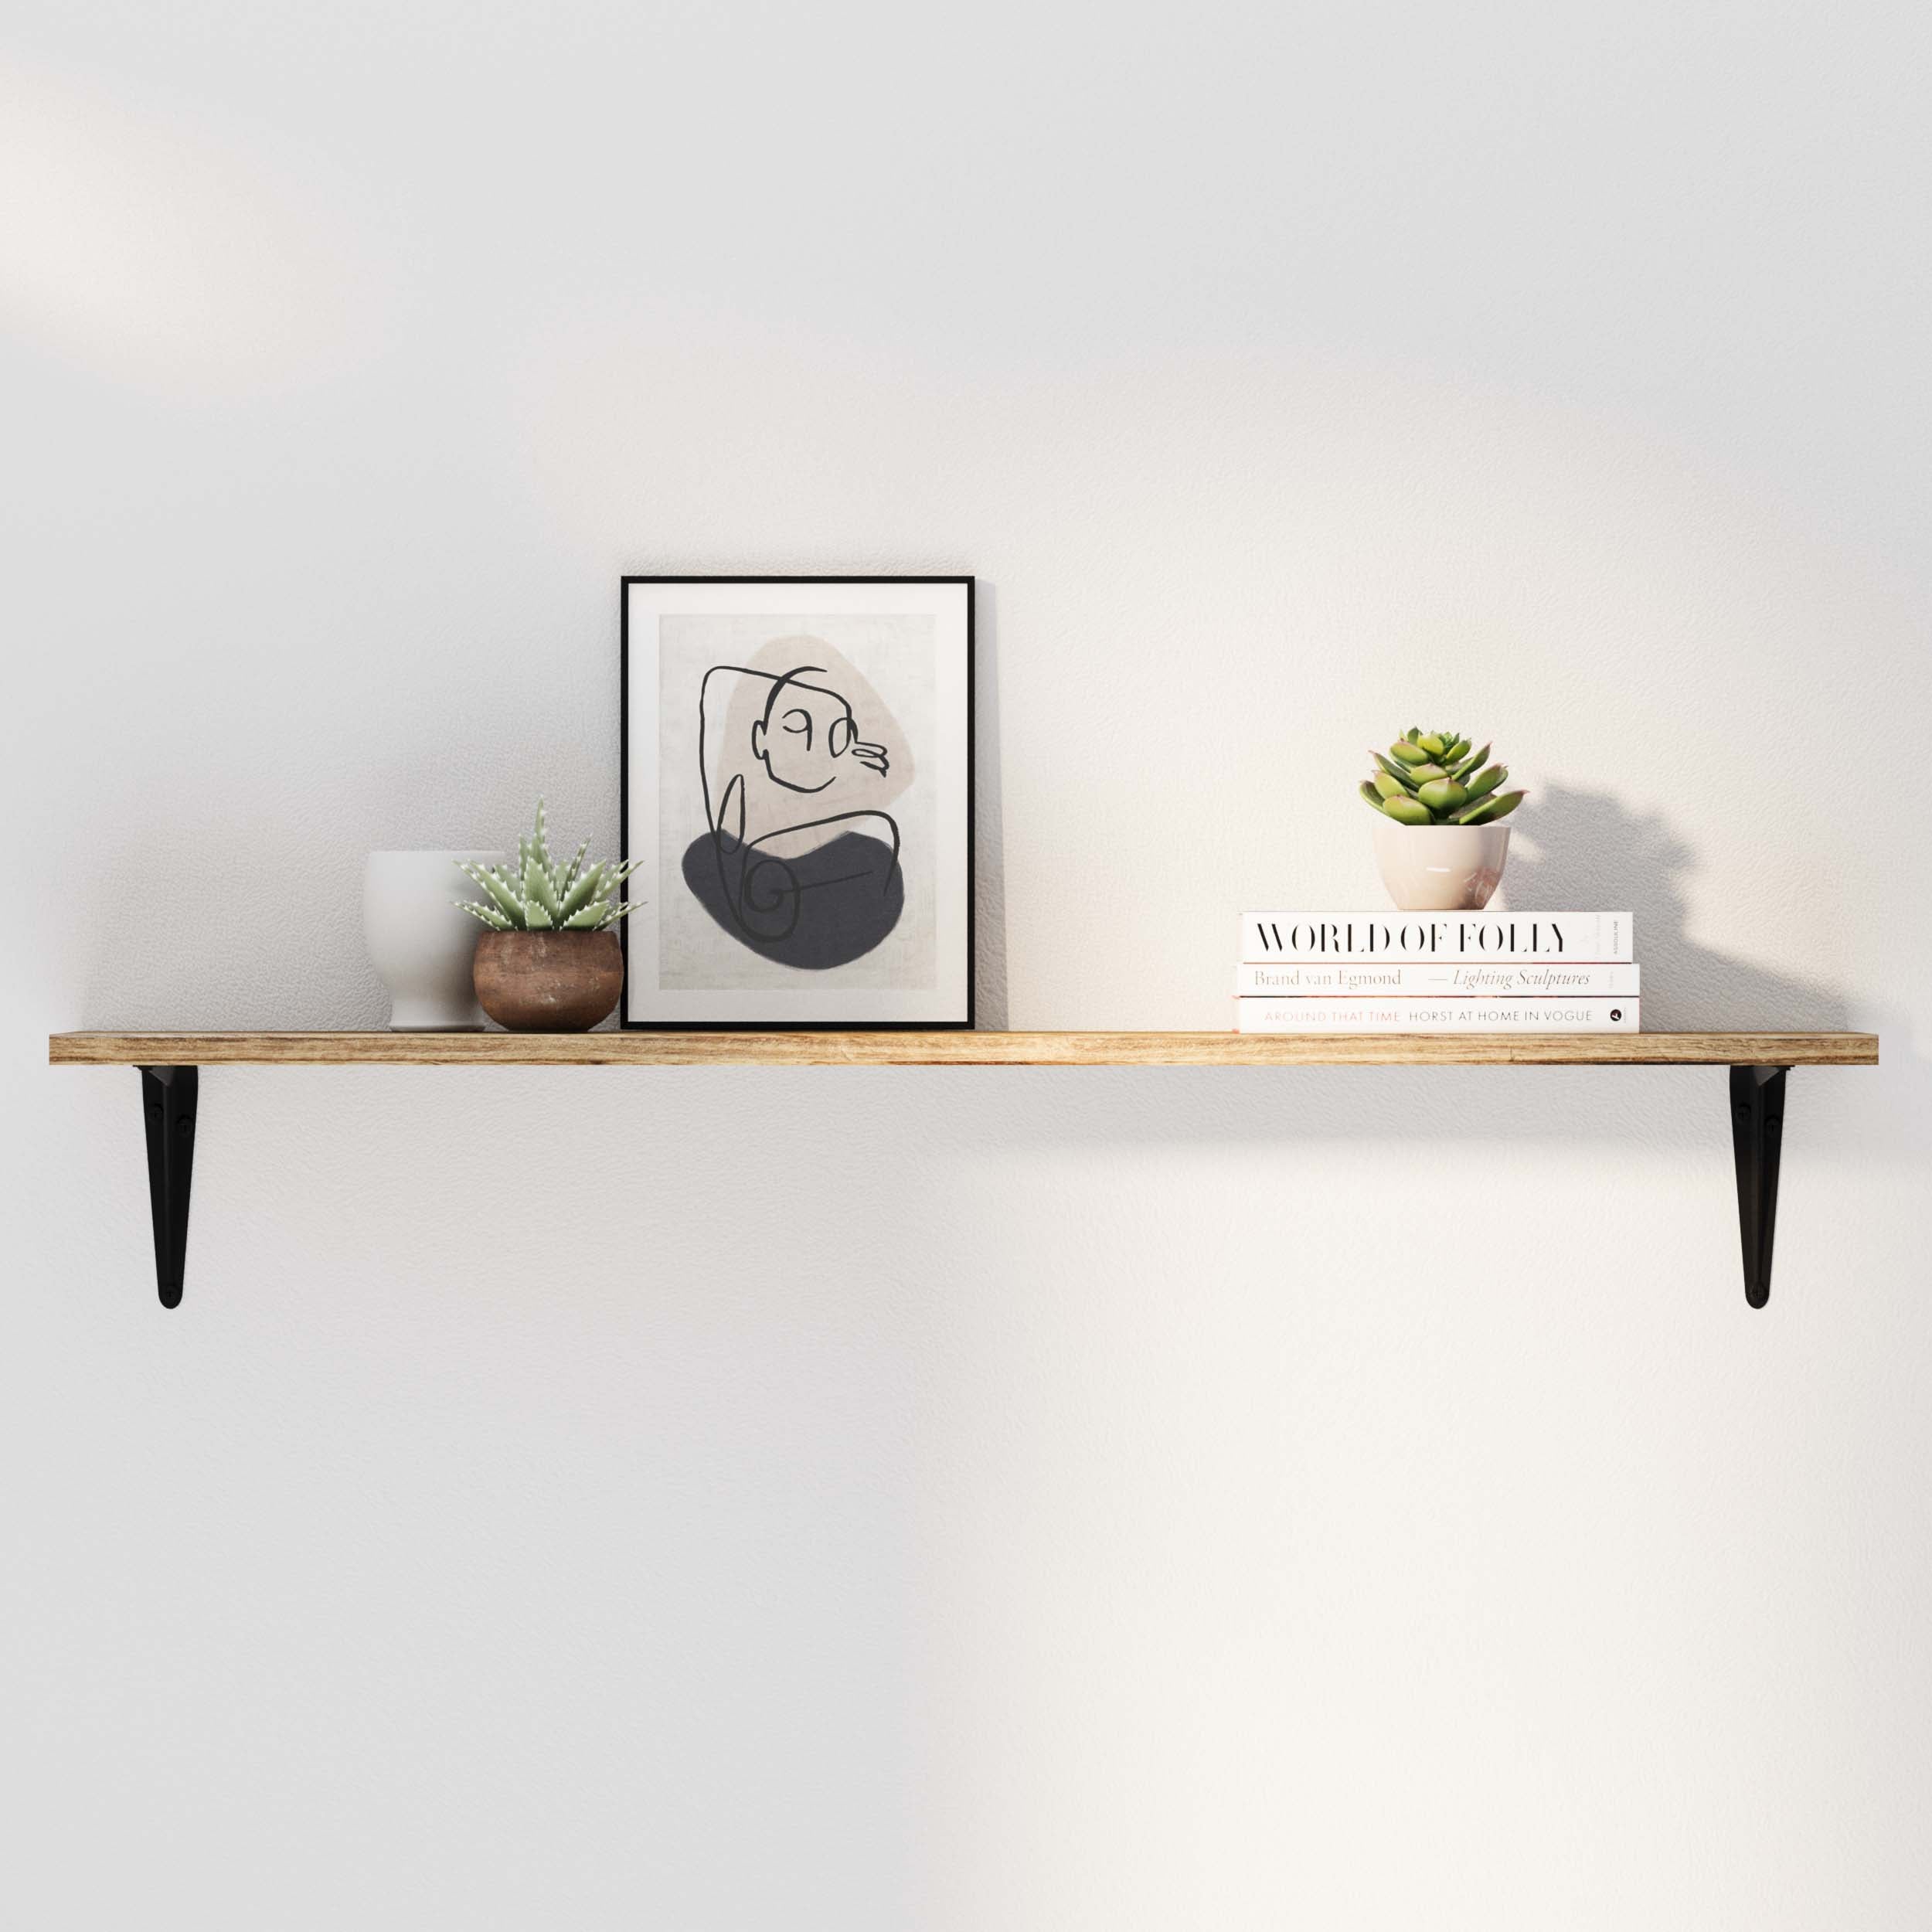 Hanging shelf burnt color in a clean, modern setting with books, a succulent, and a framed abstract artwork.